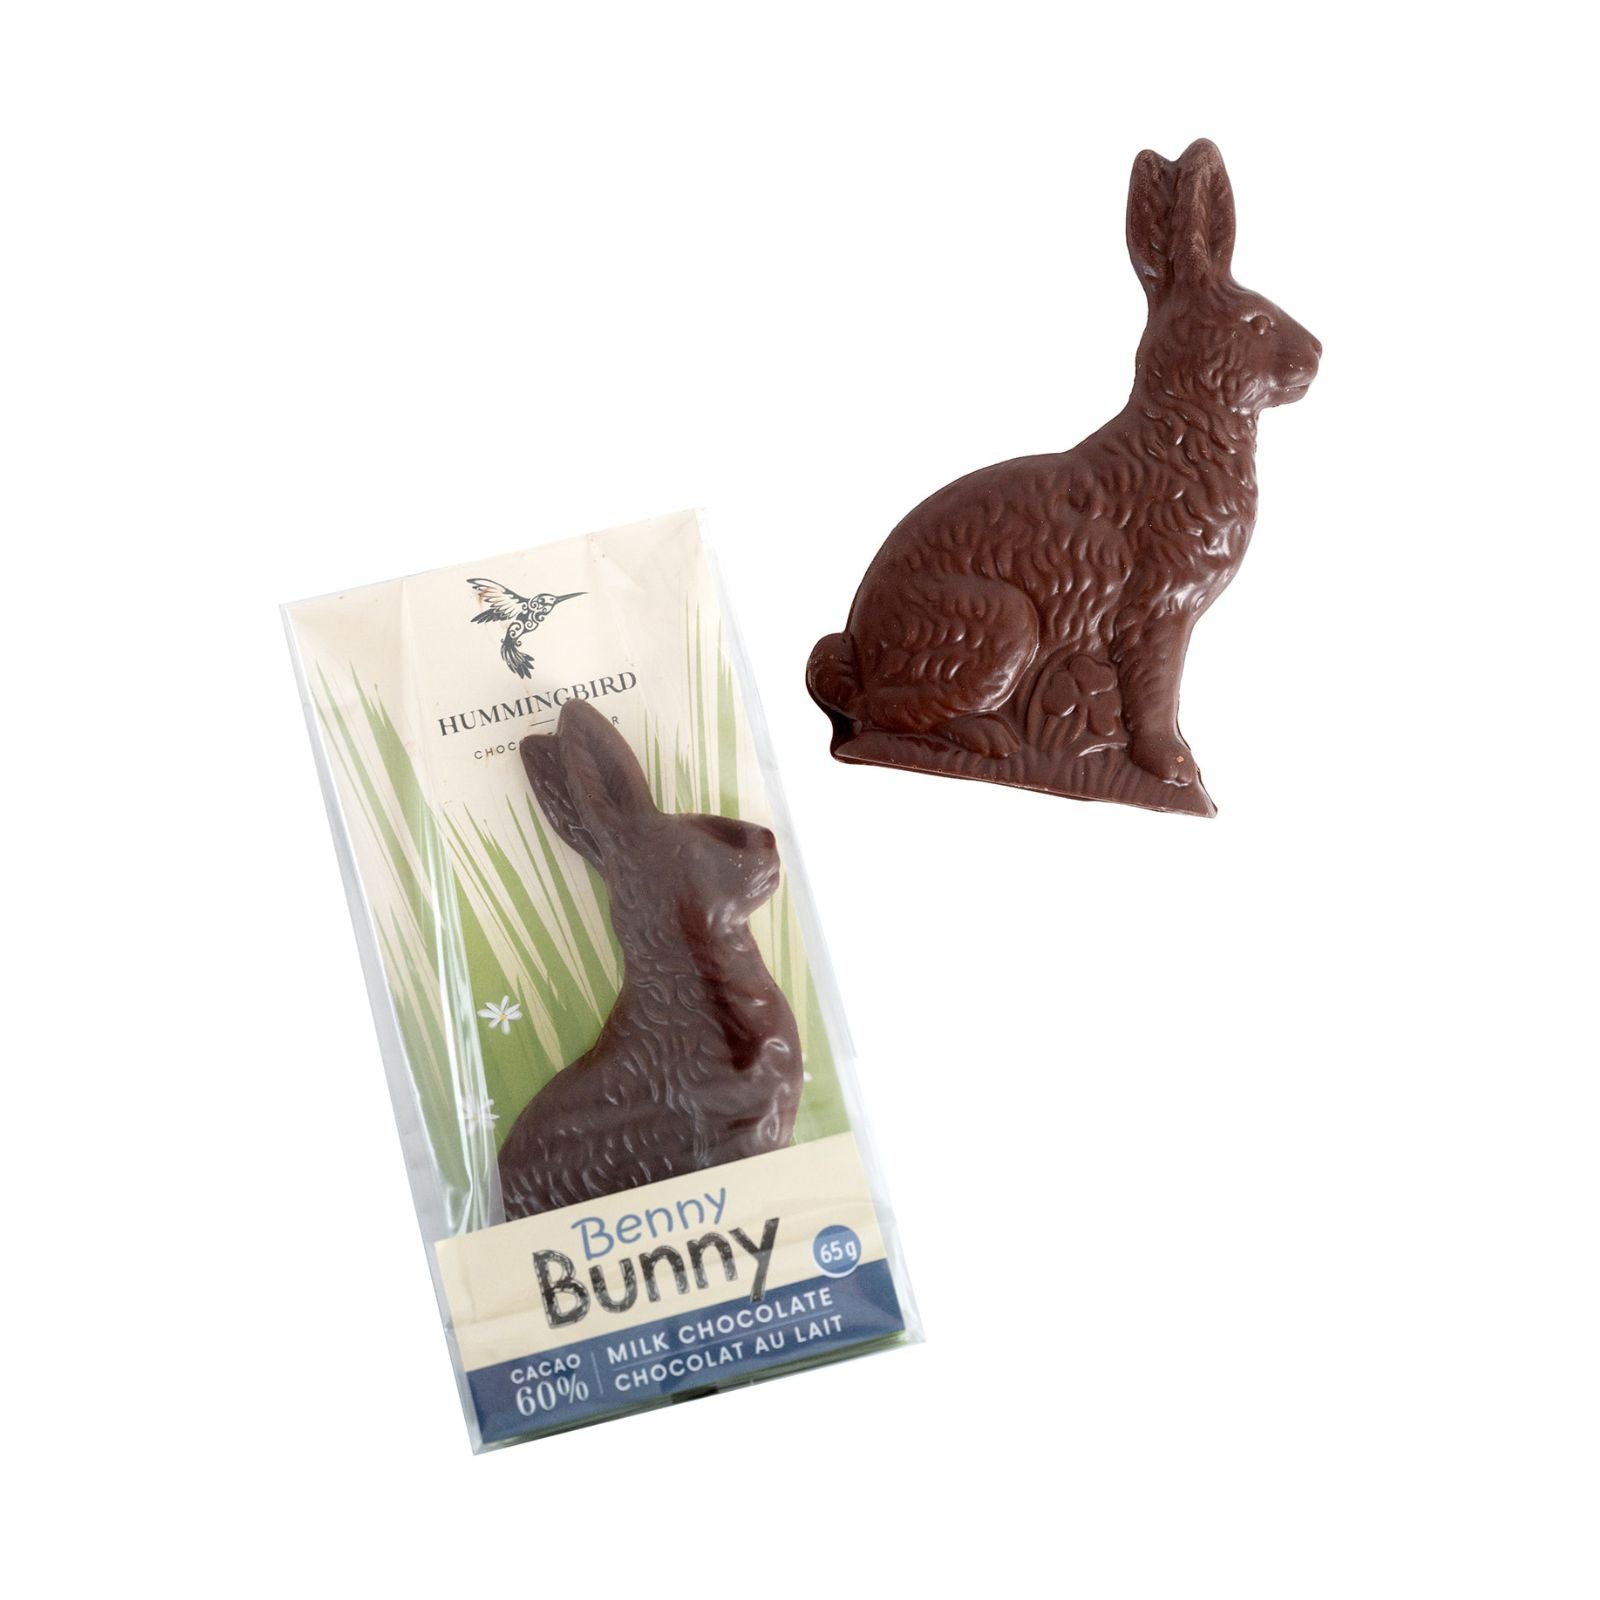 Two milk chocolate bunnies made with 60% cacao